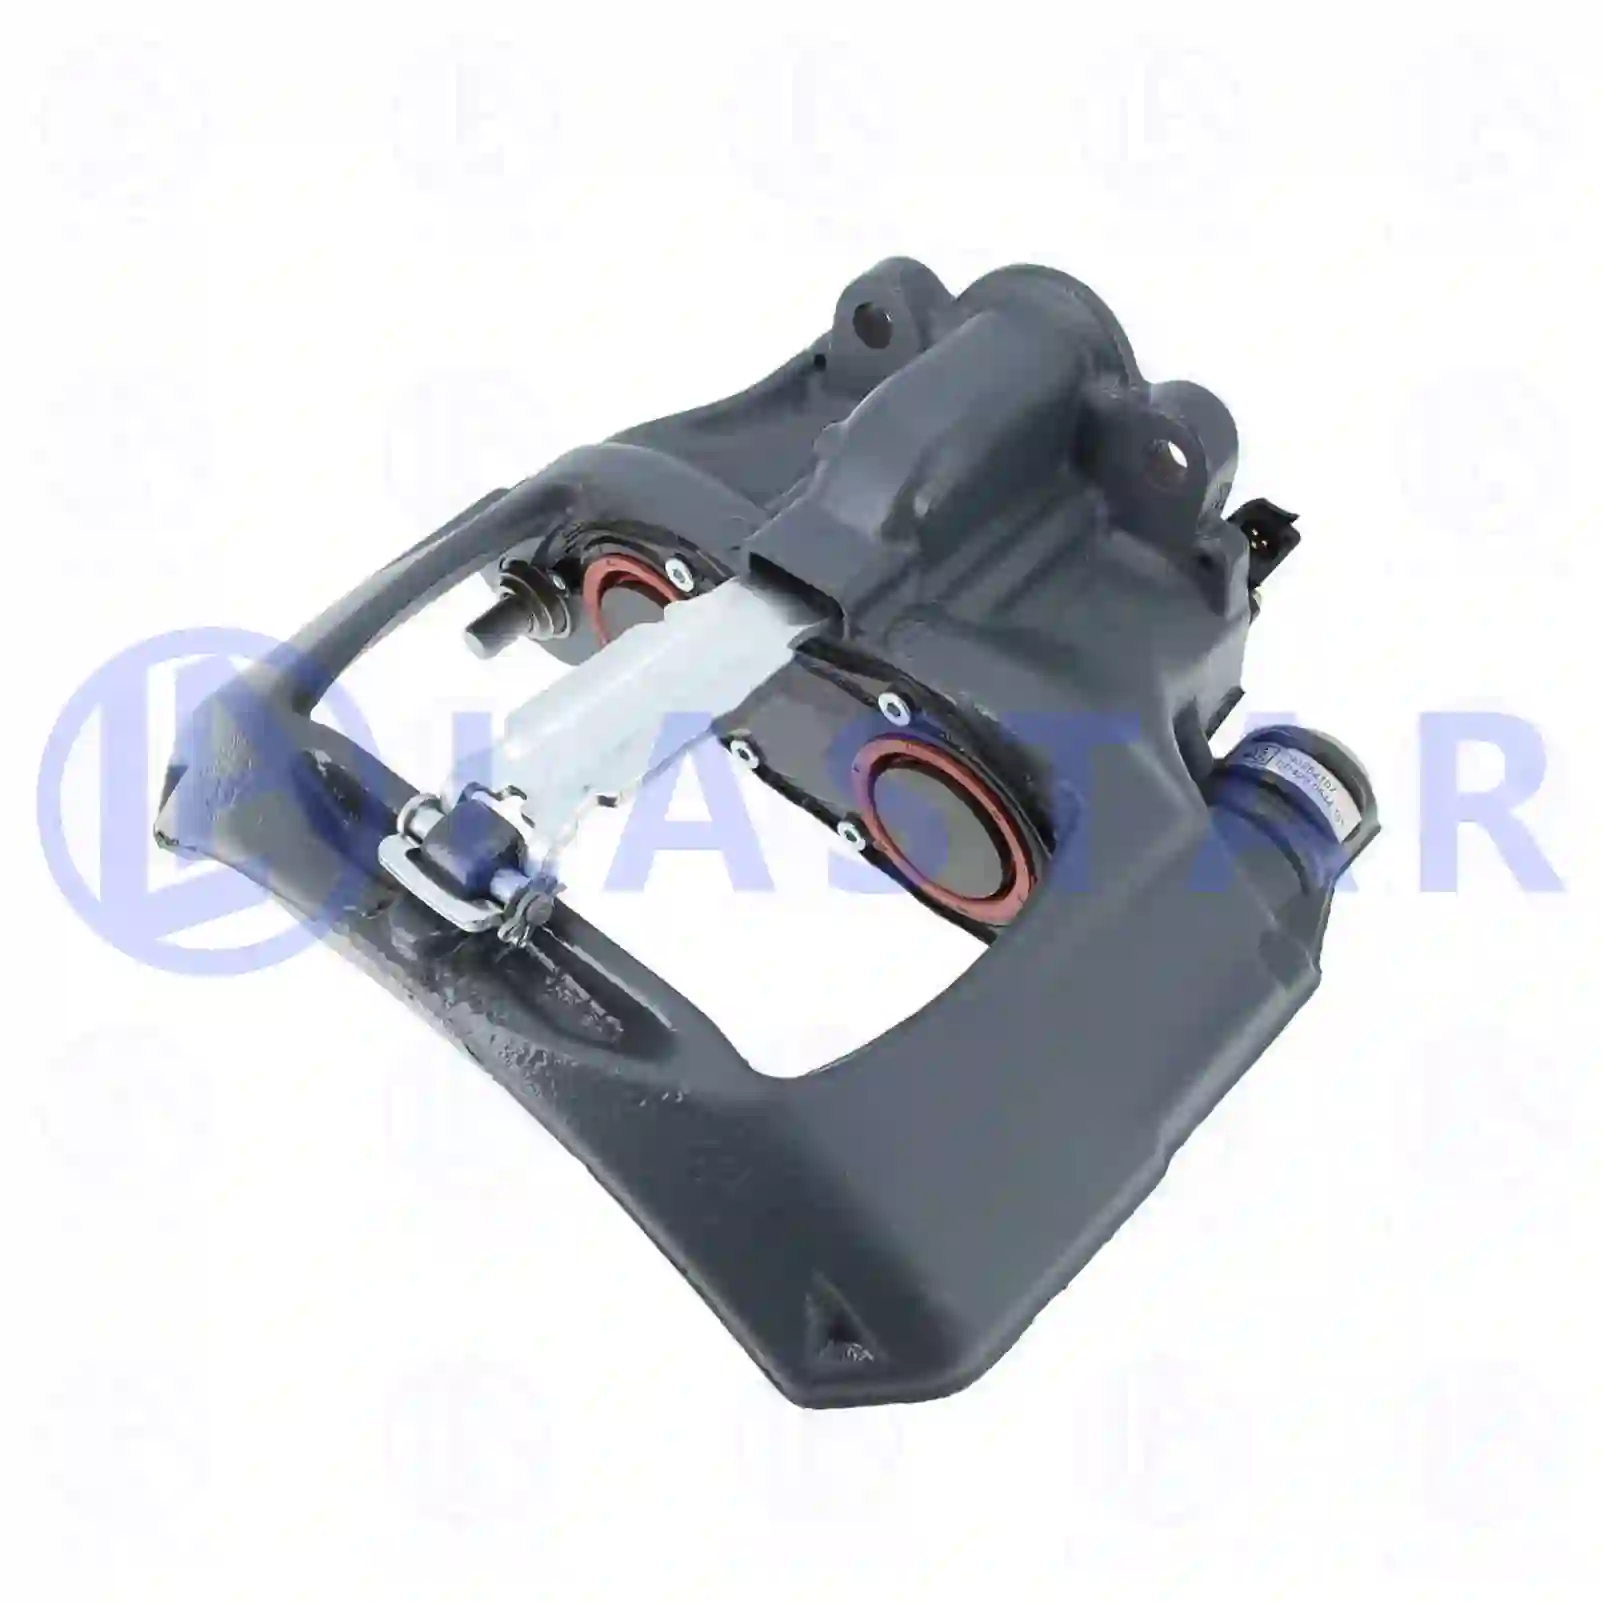 Brake caliper, right, reman. / without old core, 77714053, 0044200283, 0044207683, 0054200283 ||  77714053 Lastar Spare Part | Truck Spare Parts, Auotomotive Spare Parts Brake caliper, right, reman. / without old core, 77714053, 0044200283, 0044207683, 0054200283 ||  77714053 Lastar Spare Part | Truck Spare Parts, Auotomotive Spare Parts